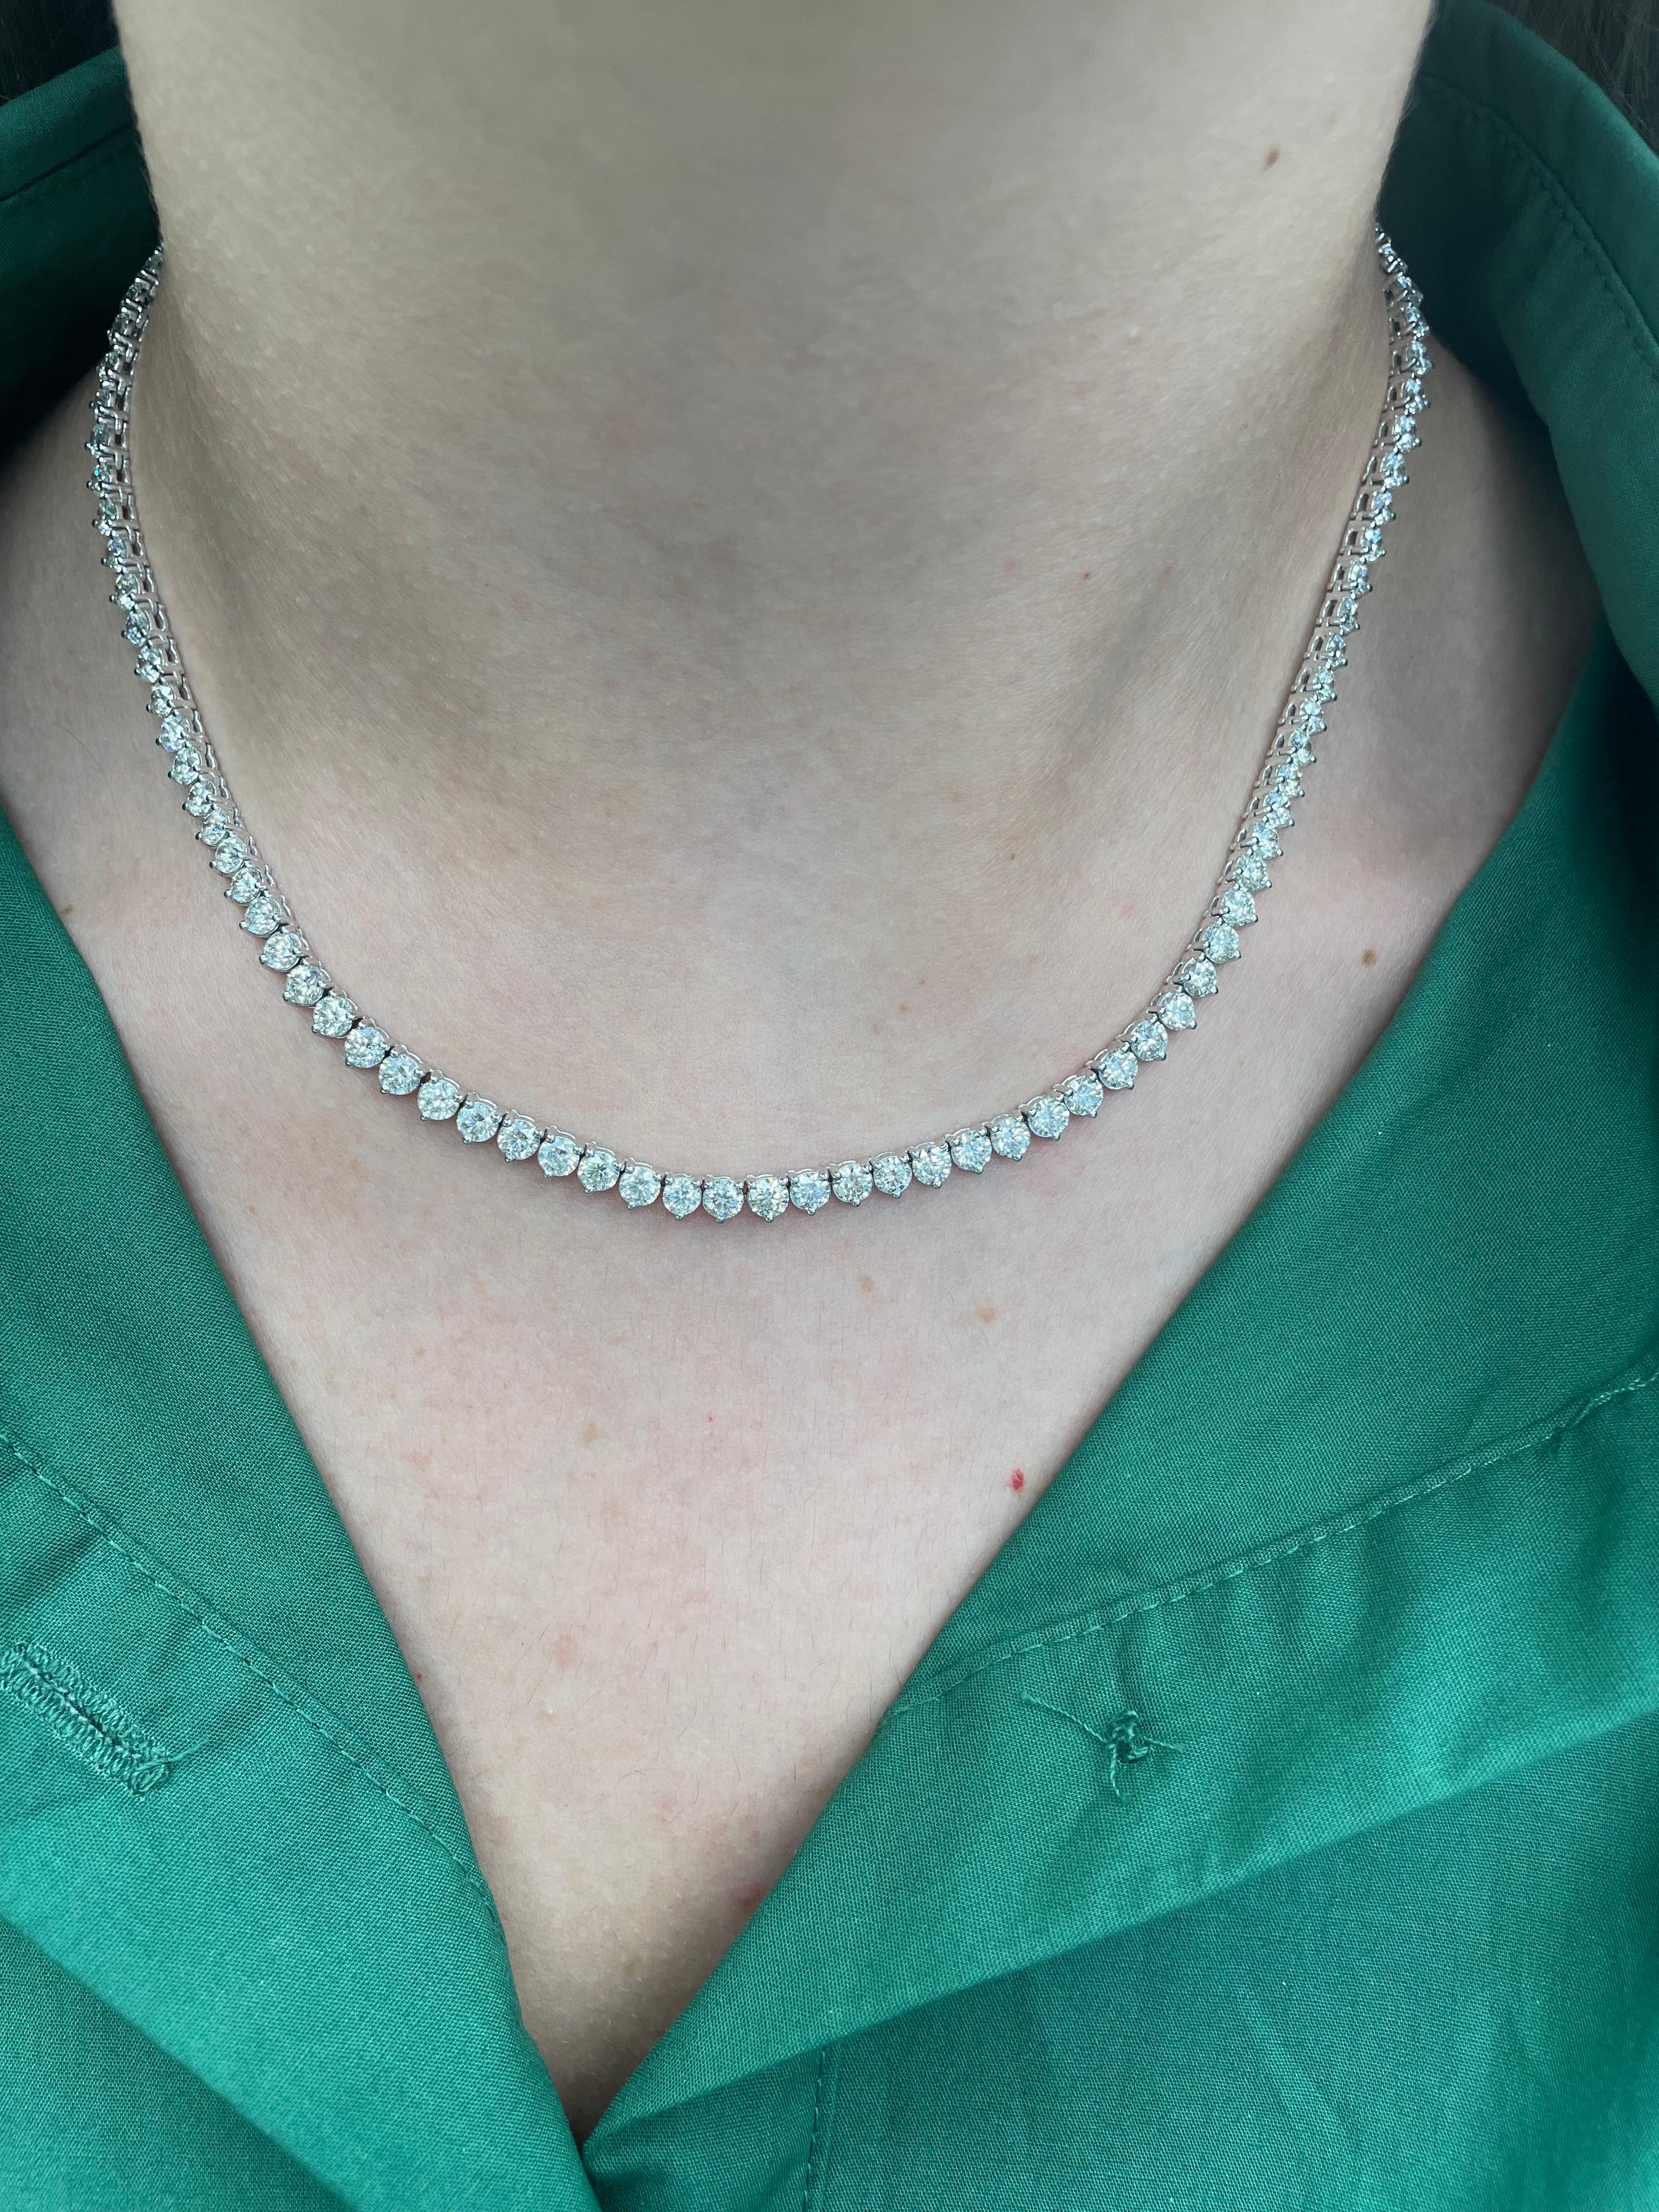 Beautiful and classic diamond tennis necklace, by Alexander Beverly Hills.
17.41 carats of round brilliant diamonds, approximately H/I color and VS clarity. 14k white gold, 21.92 grams, prong set, 17in.
Accommodated with an up-to-date appraisal by a